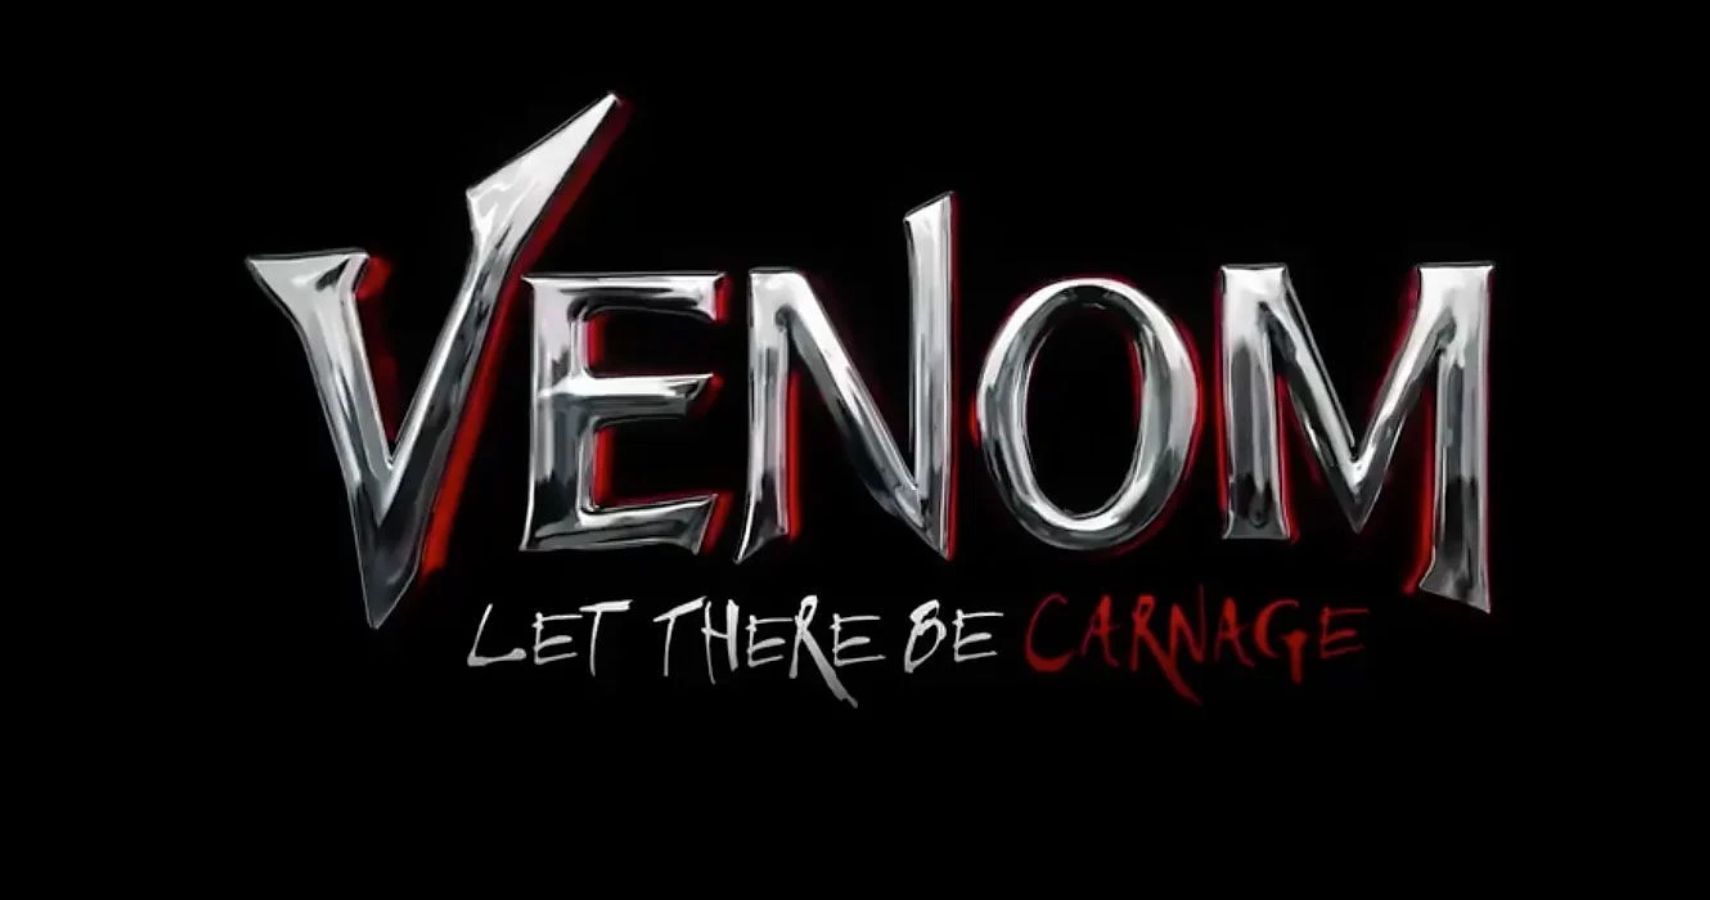 Venom Let There Be Carnage Delayed Again By One Week